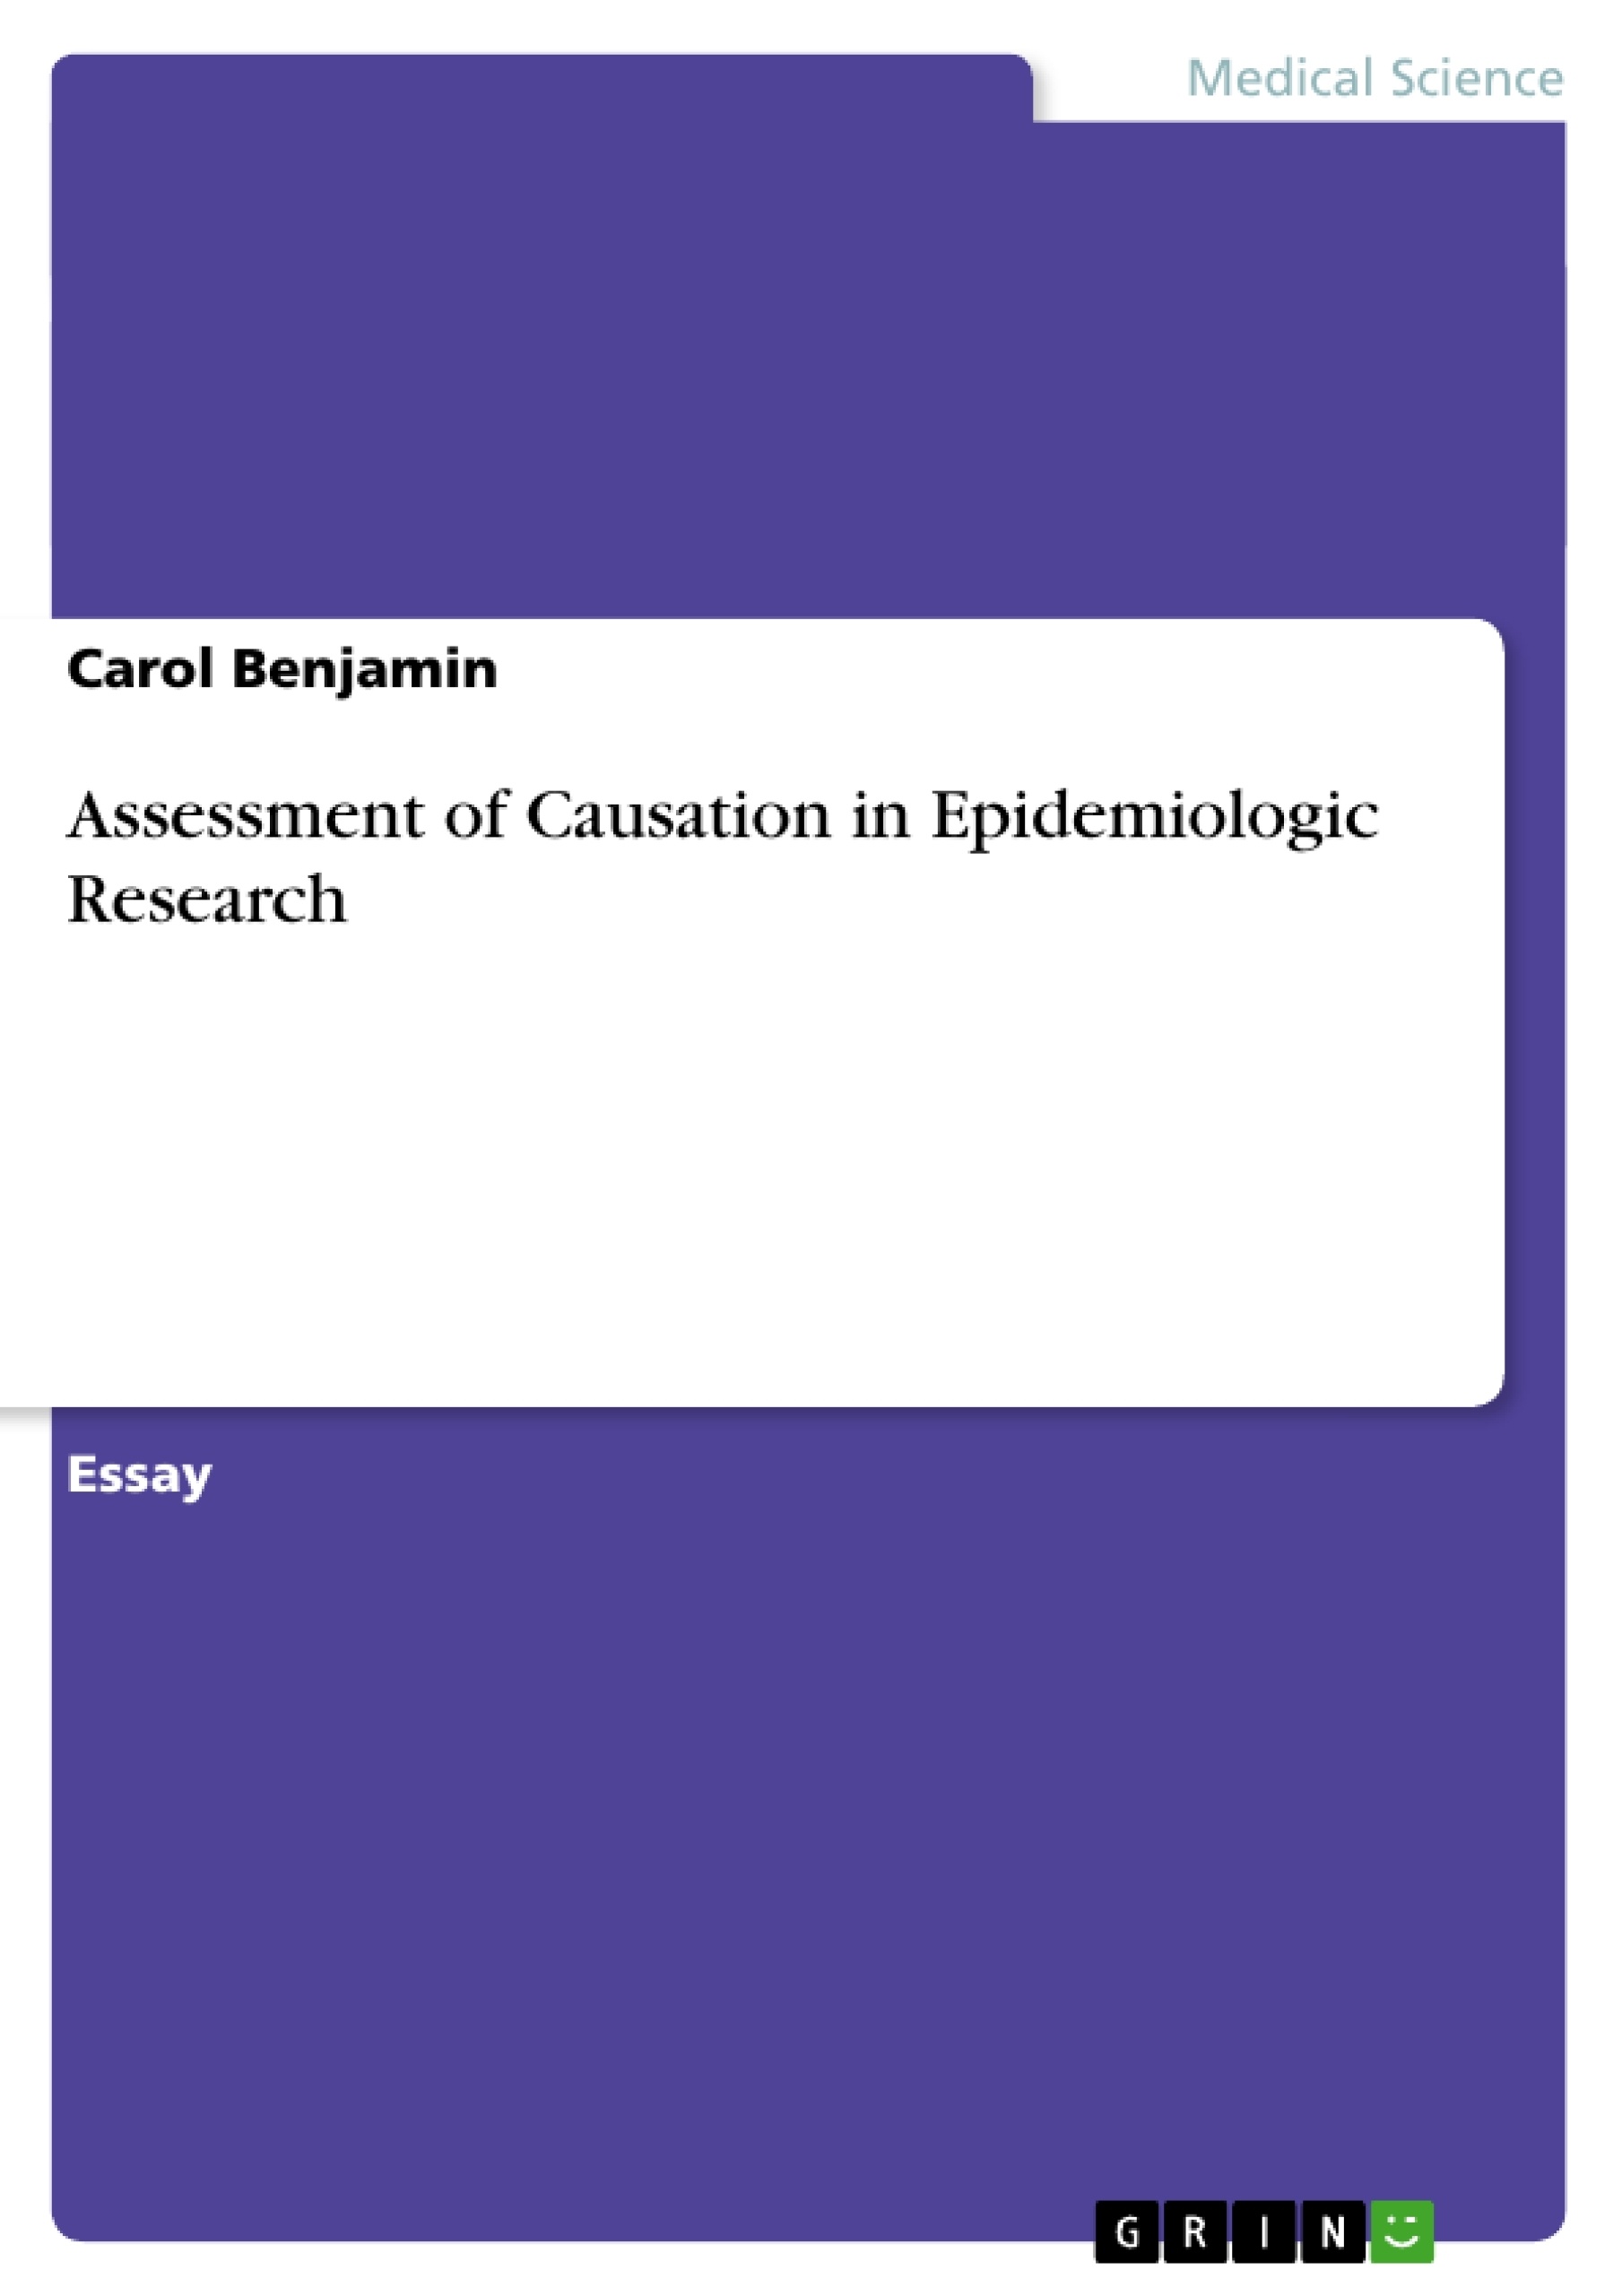 Título: Assessment of Causation in Epidemiologic Research